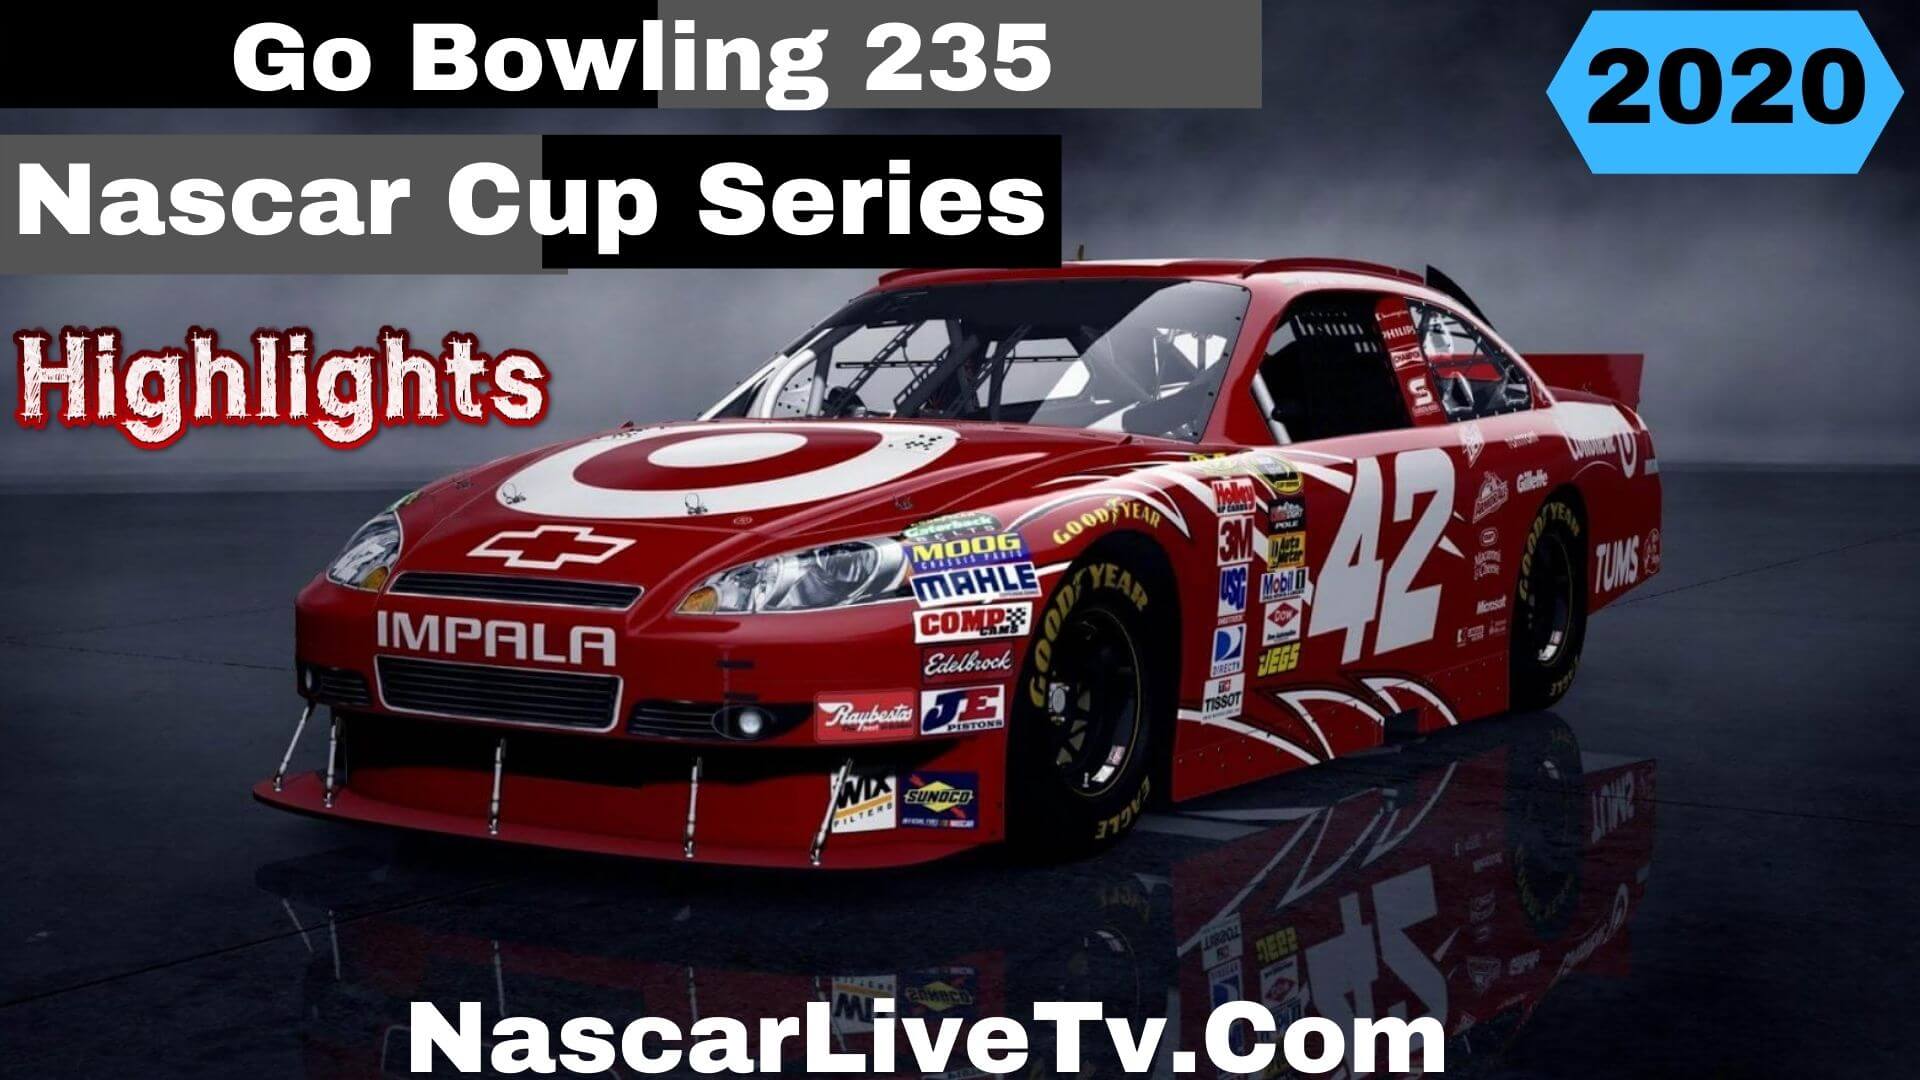 Go Bowling 235 Nascar Cup Series 2020 Highlights